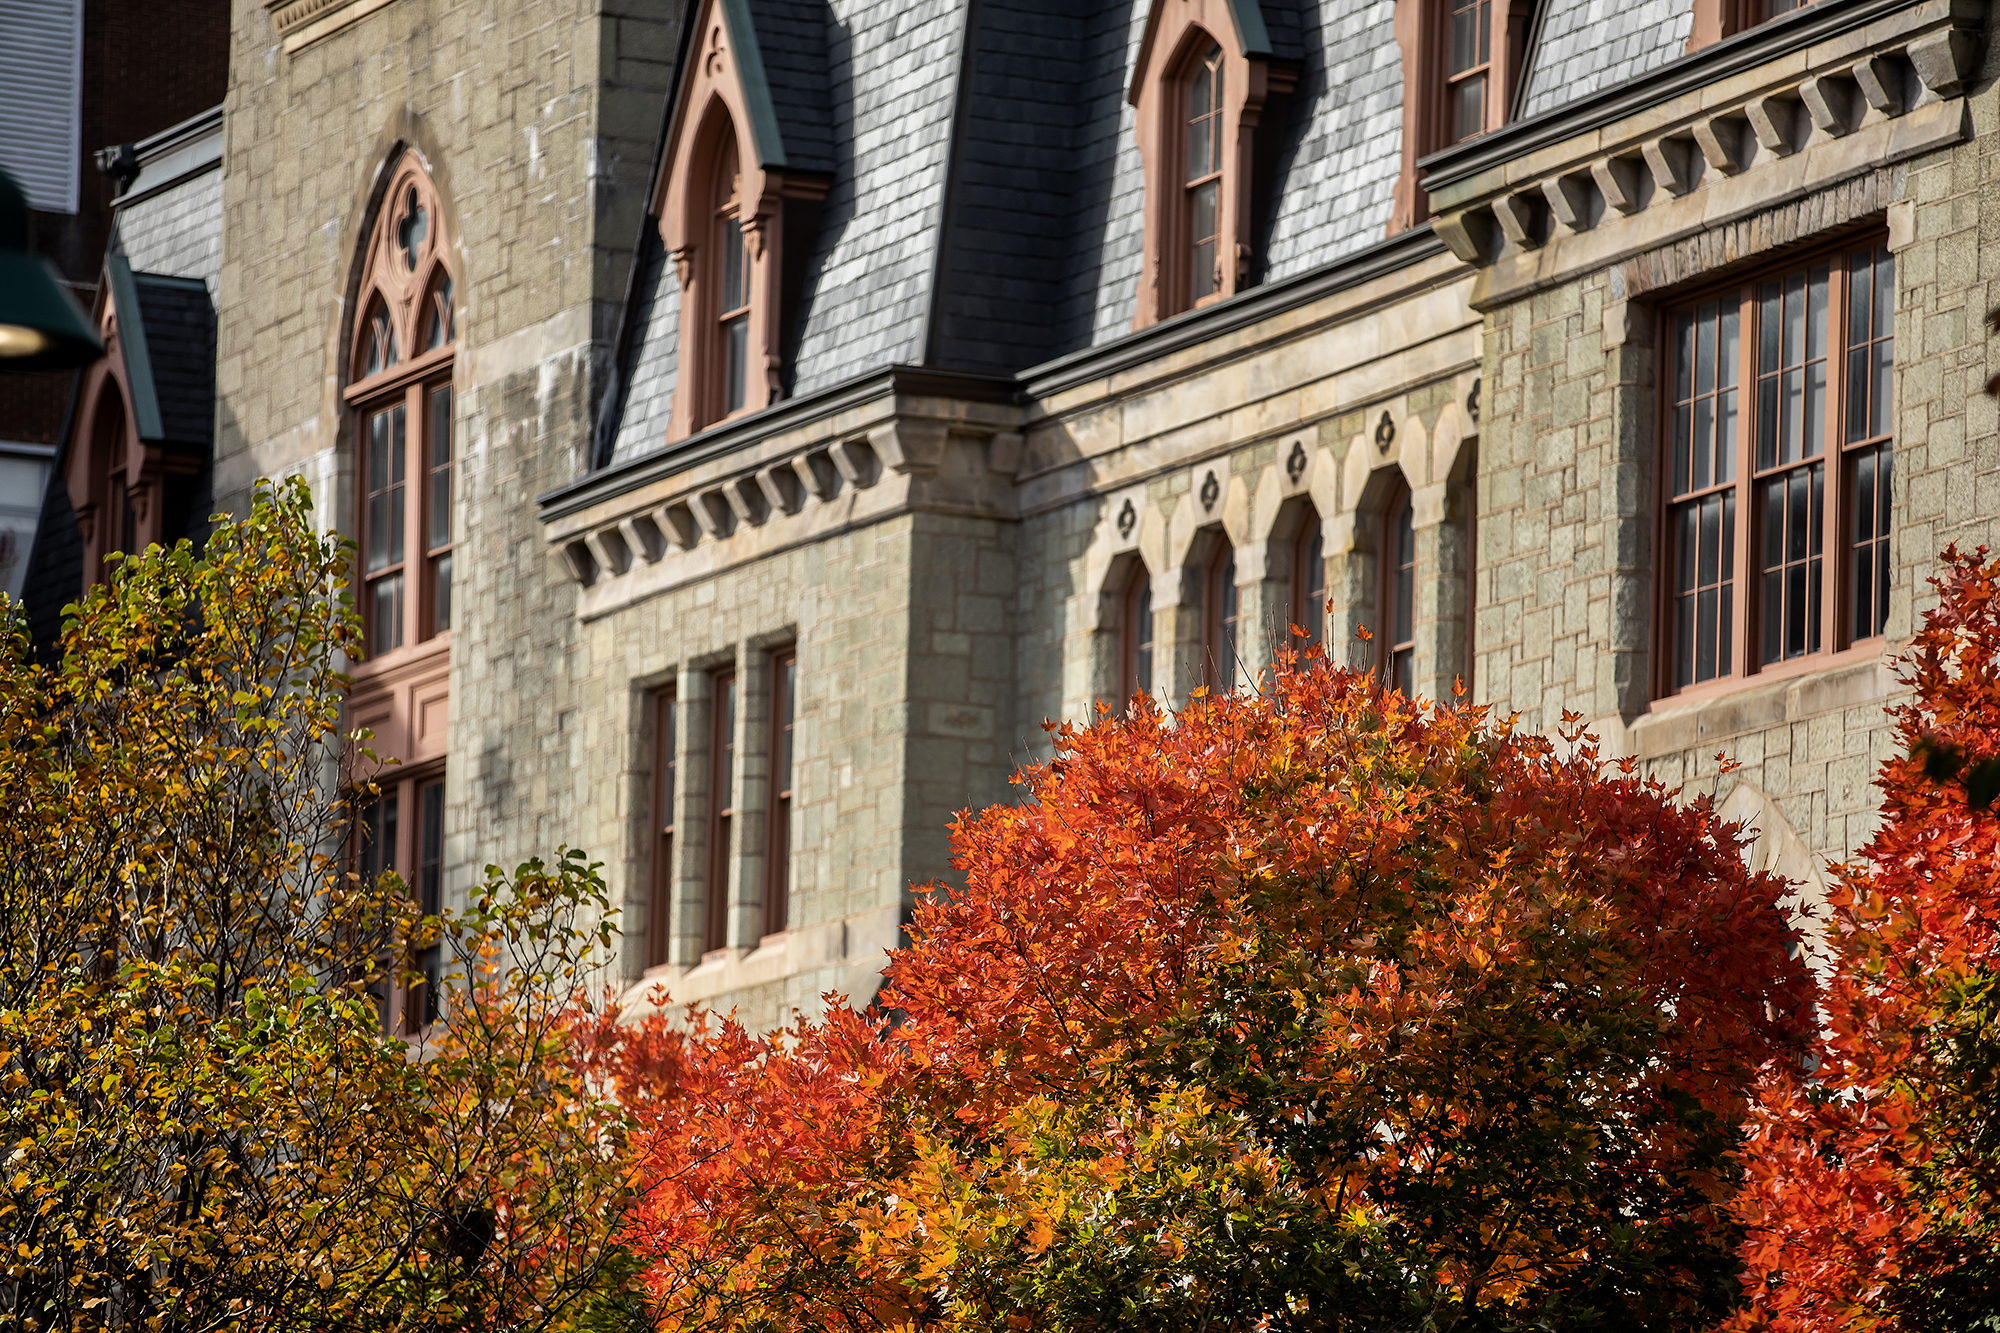 College Hall on Penn campus with bright fall foliage